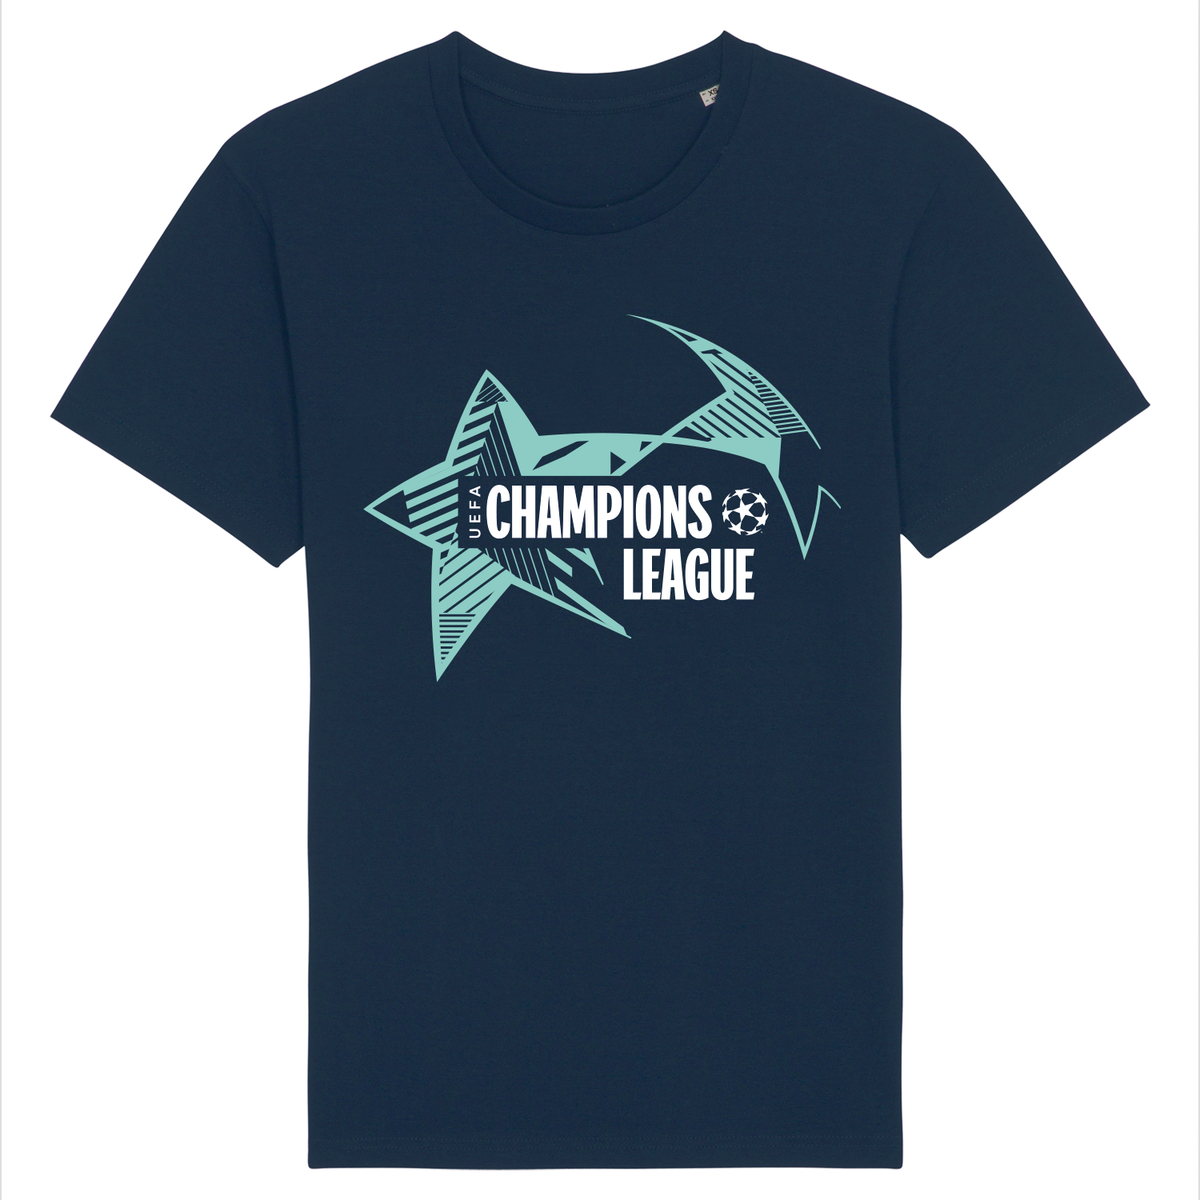 UEFA Champions League - Star Dazzle Navy T-Shirt UEFA Club Competitions Online Store